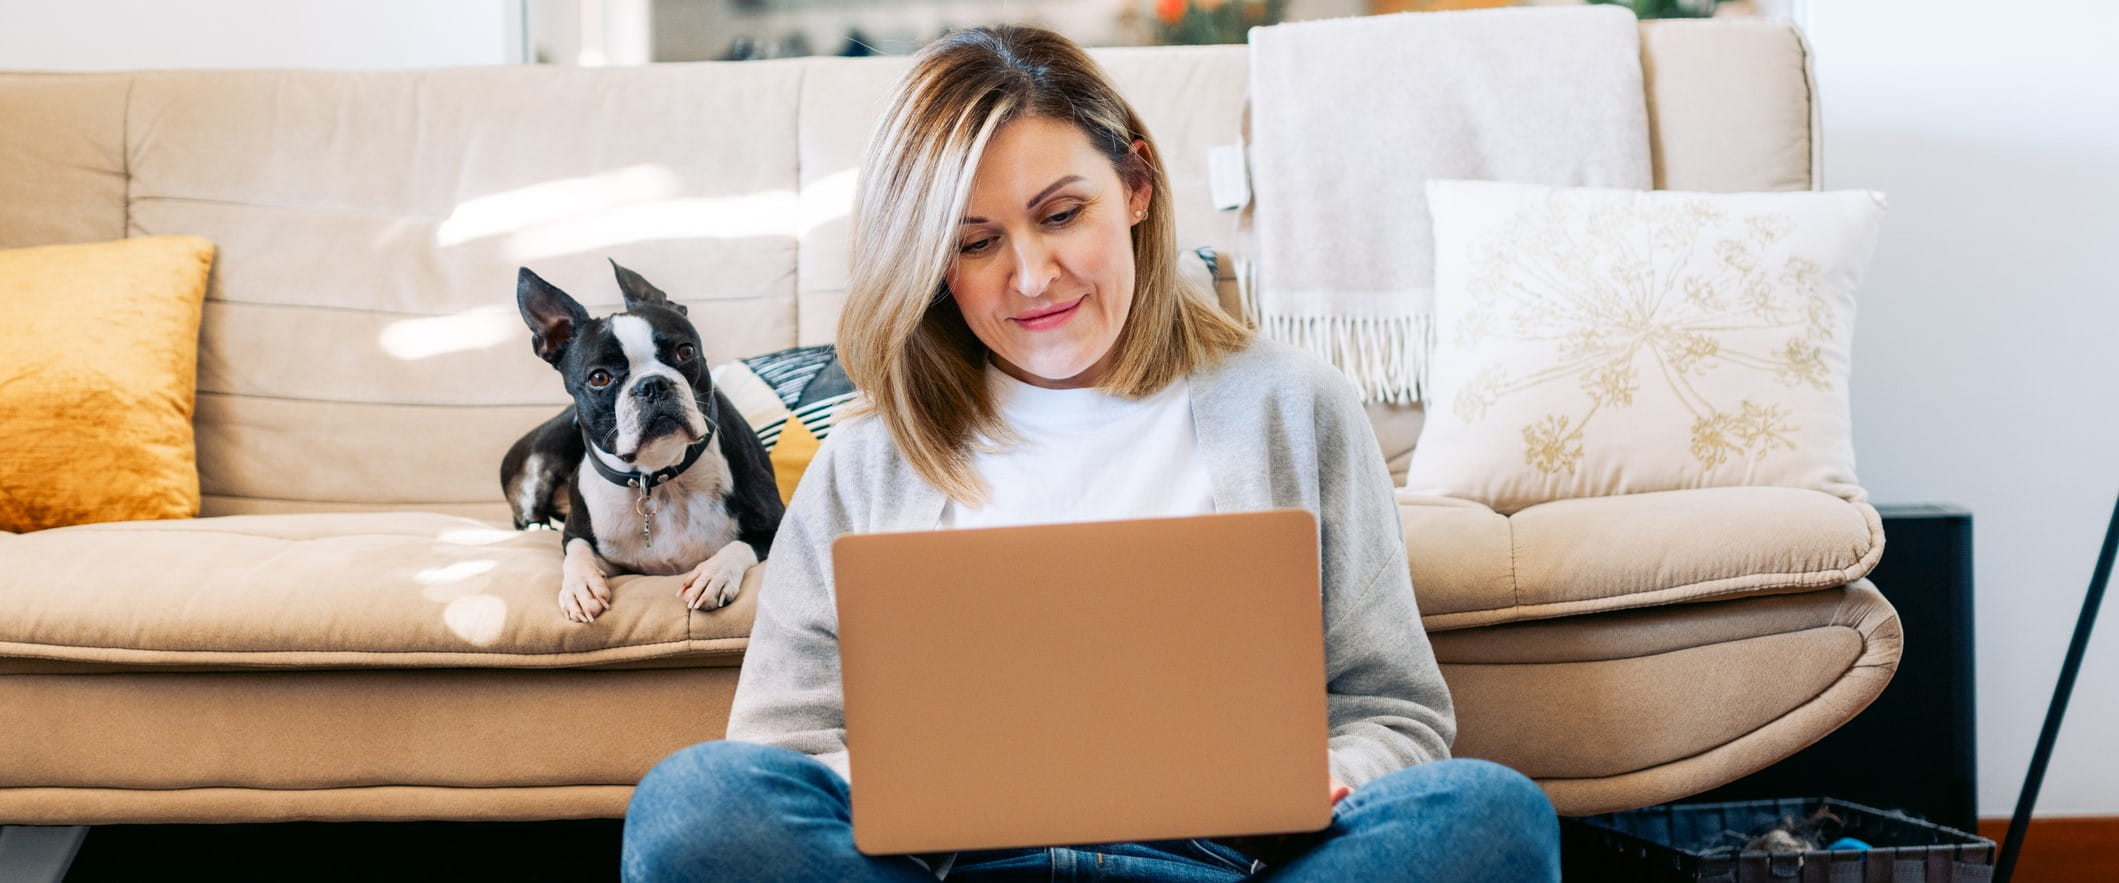 A person sits on the floor, leaning against a couch, with their laptop in their lap. A dog sits behind them on the couch.